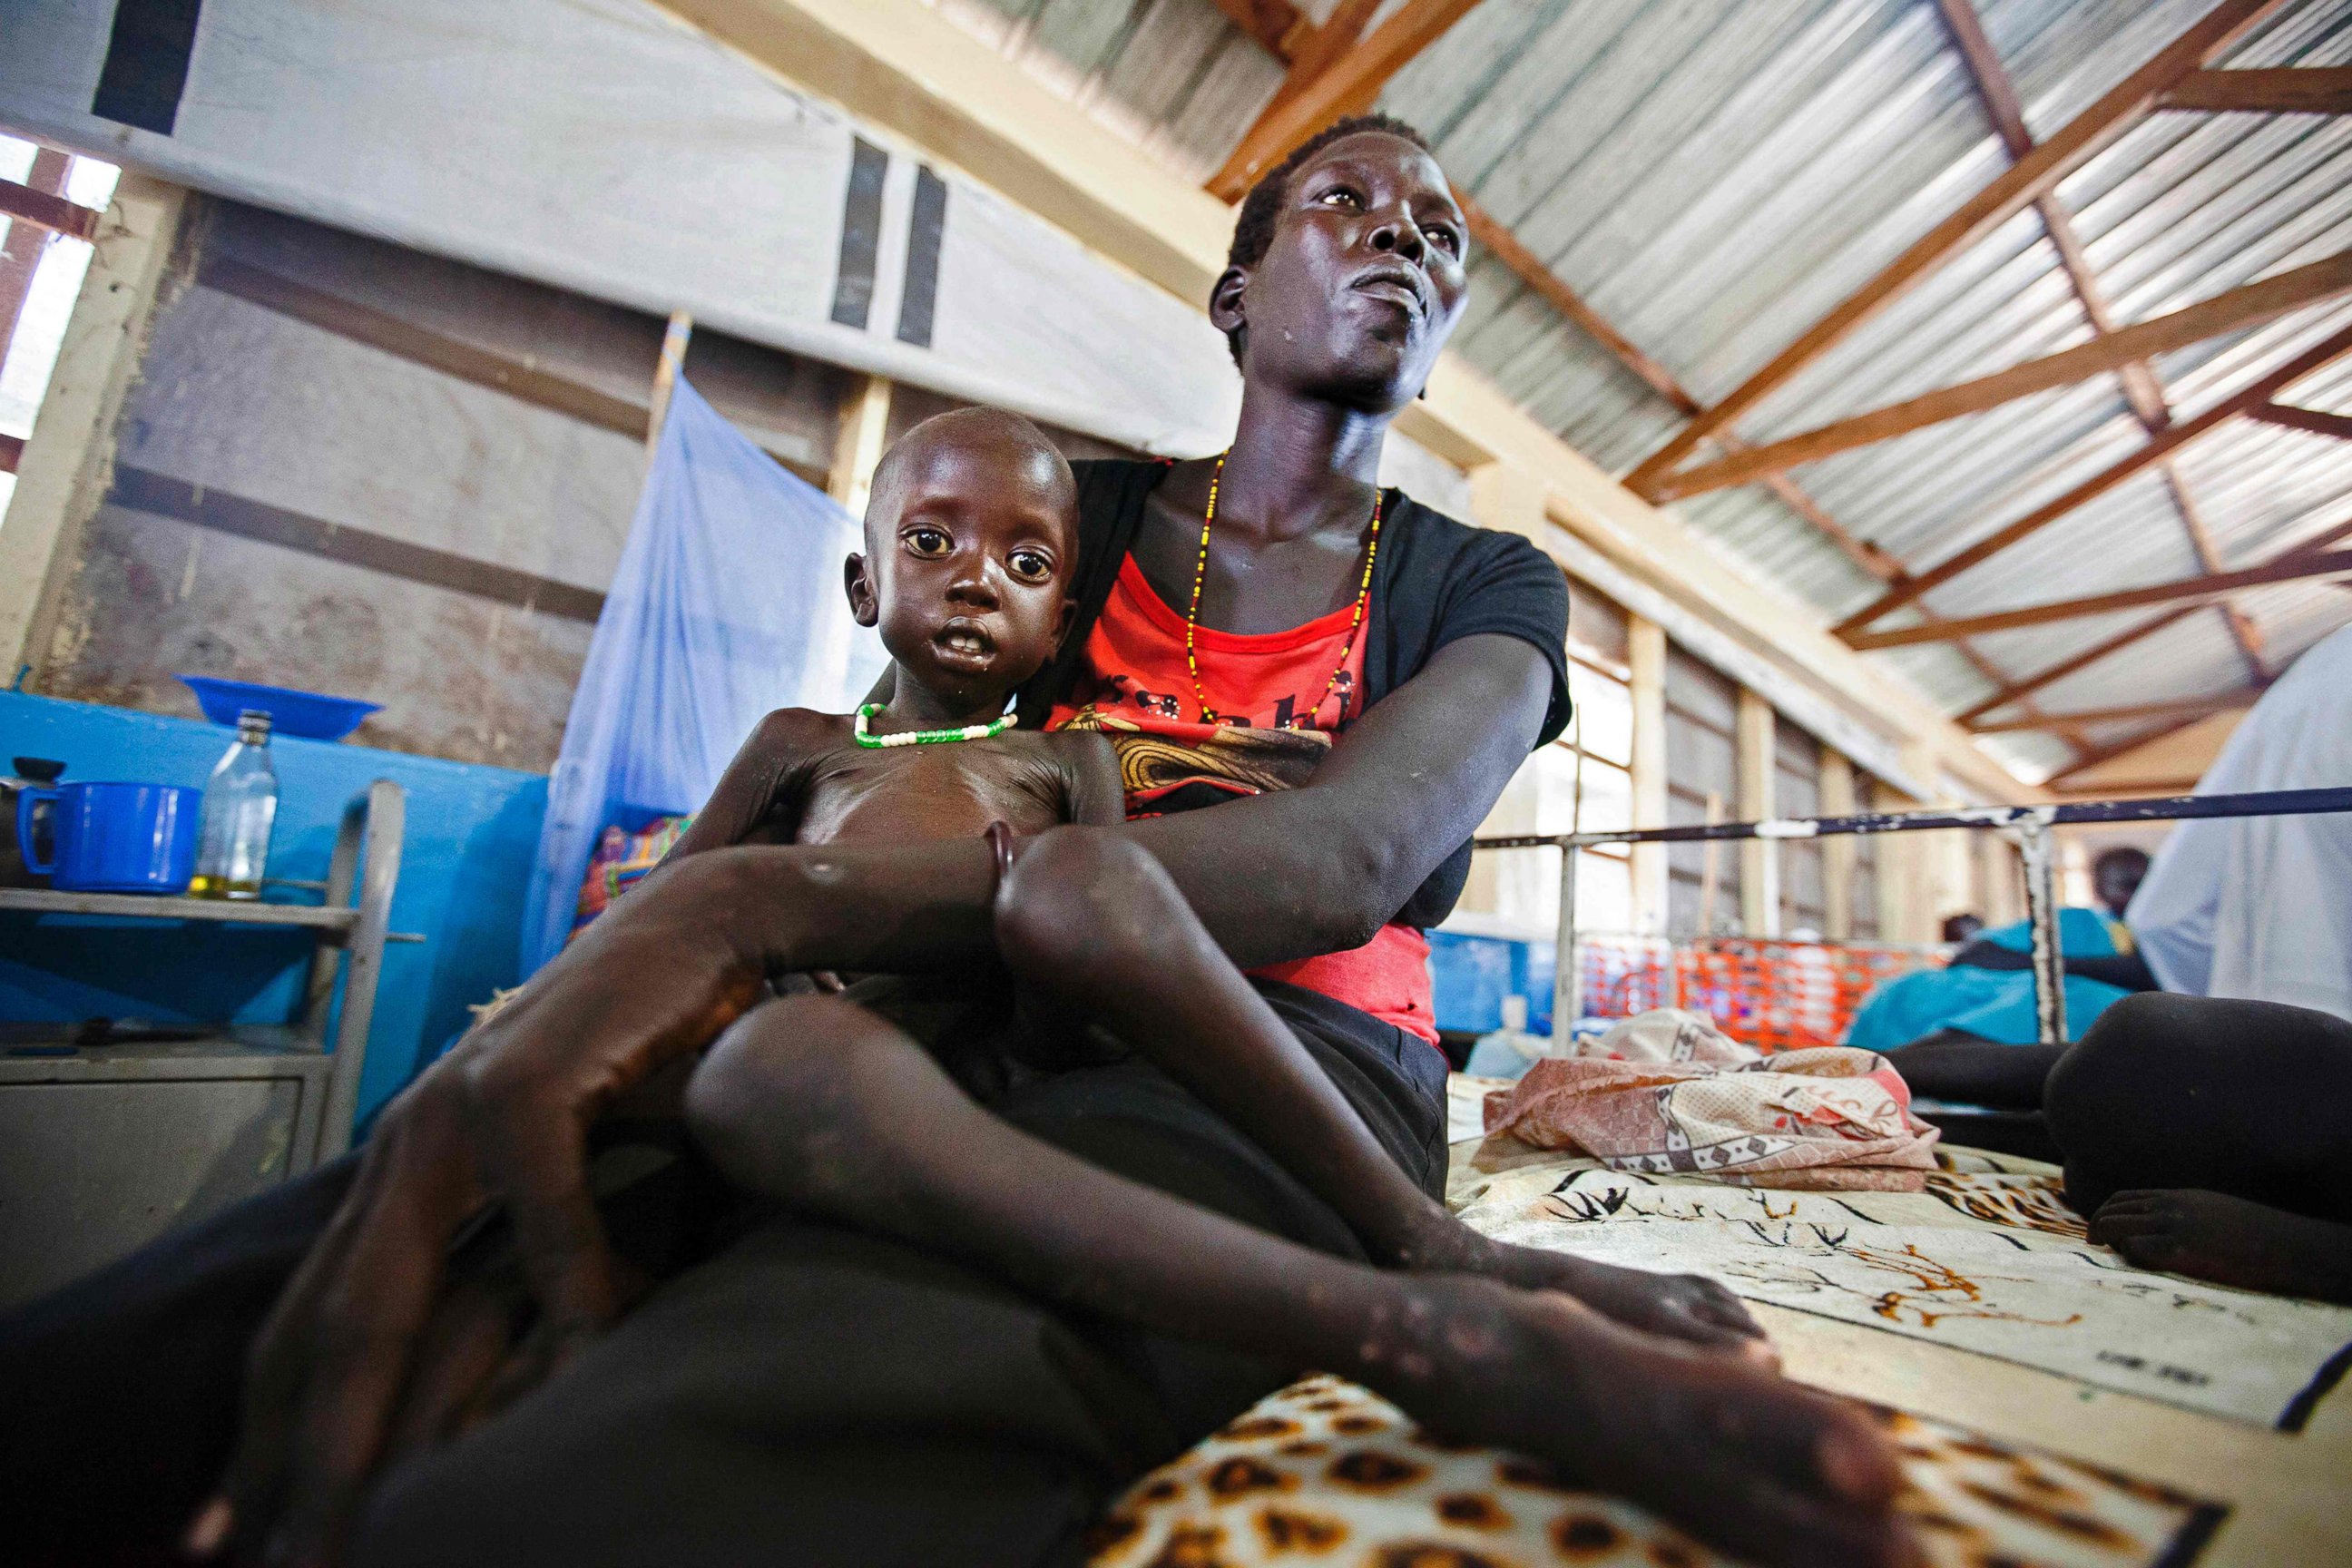 PHOTO: Lucia Adeng Wek holds her son Wek Wol Wek, 3, who suffers acute malnutrition at the clinic run by Doctors without Borders (MSF) in Aweil, Northern Bahr al Ghazal, South Sudan, Oct. 11, 2016.